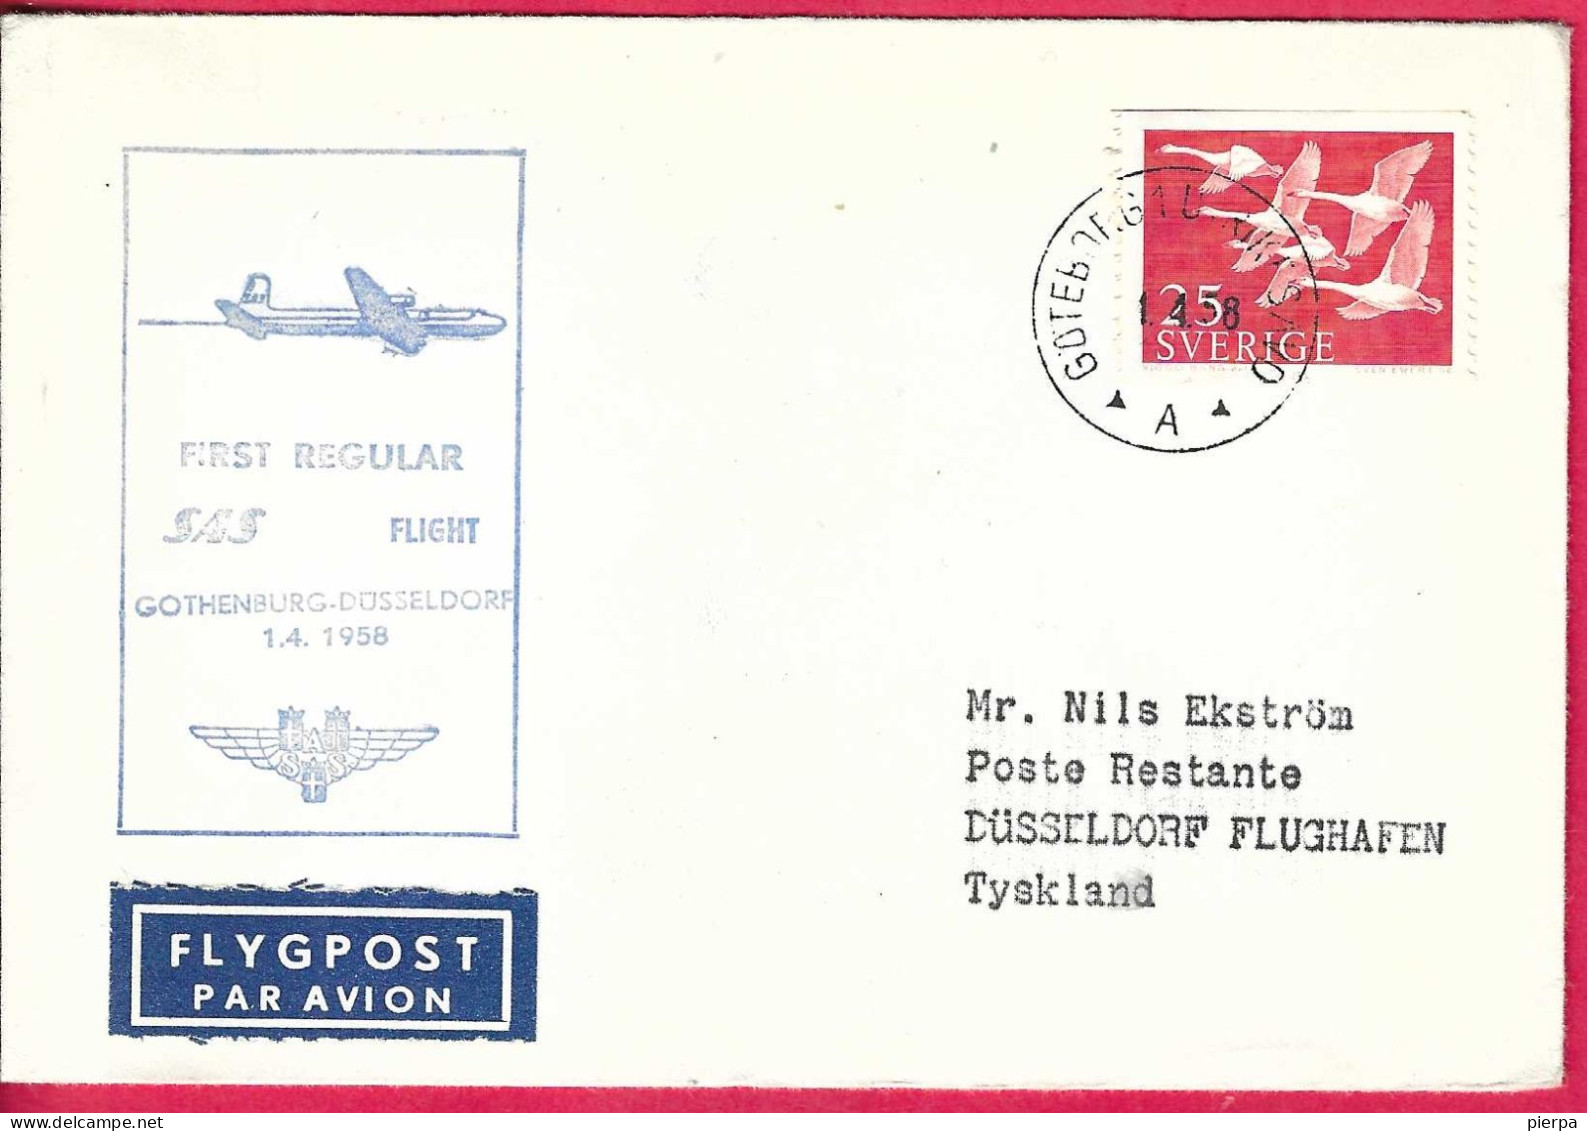 SVERIGE - FIRST REGULAR FLIGHT SAS  FROM GOTHENBURH TO DUSSELDORF *1.4.58* ON OFFICIAL COVER - Lettres & Documents